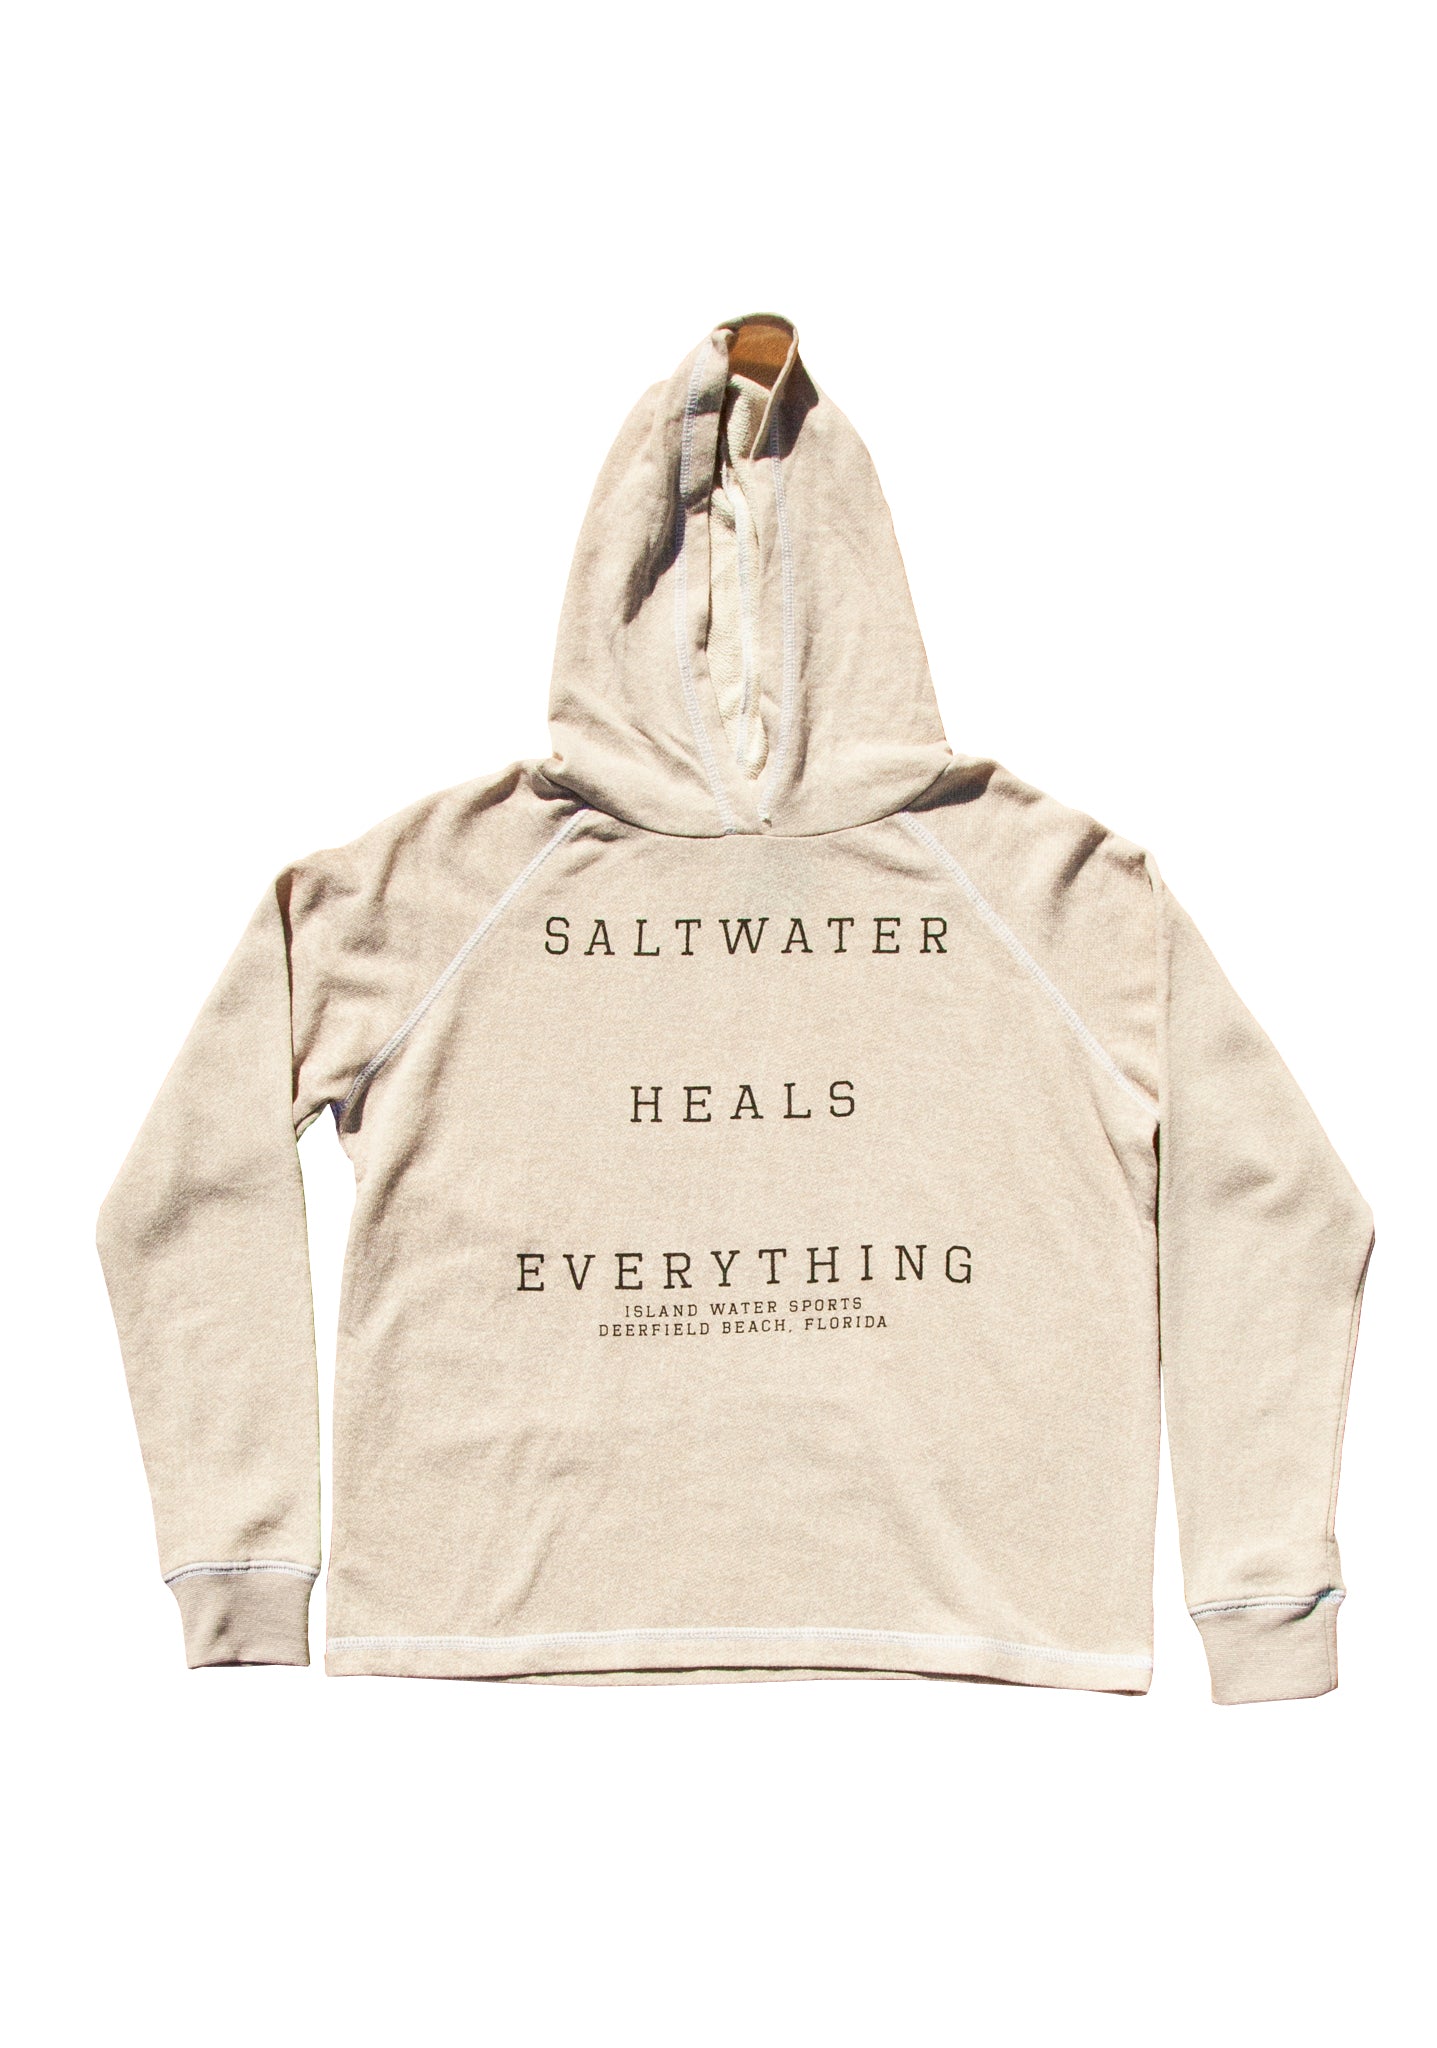 Island Water Sports Saltwater Heals Everything Terry Boxy Pullover Hoodie CC3007 LtGREY S